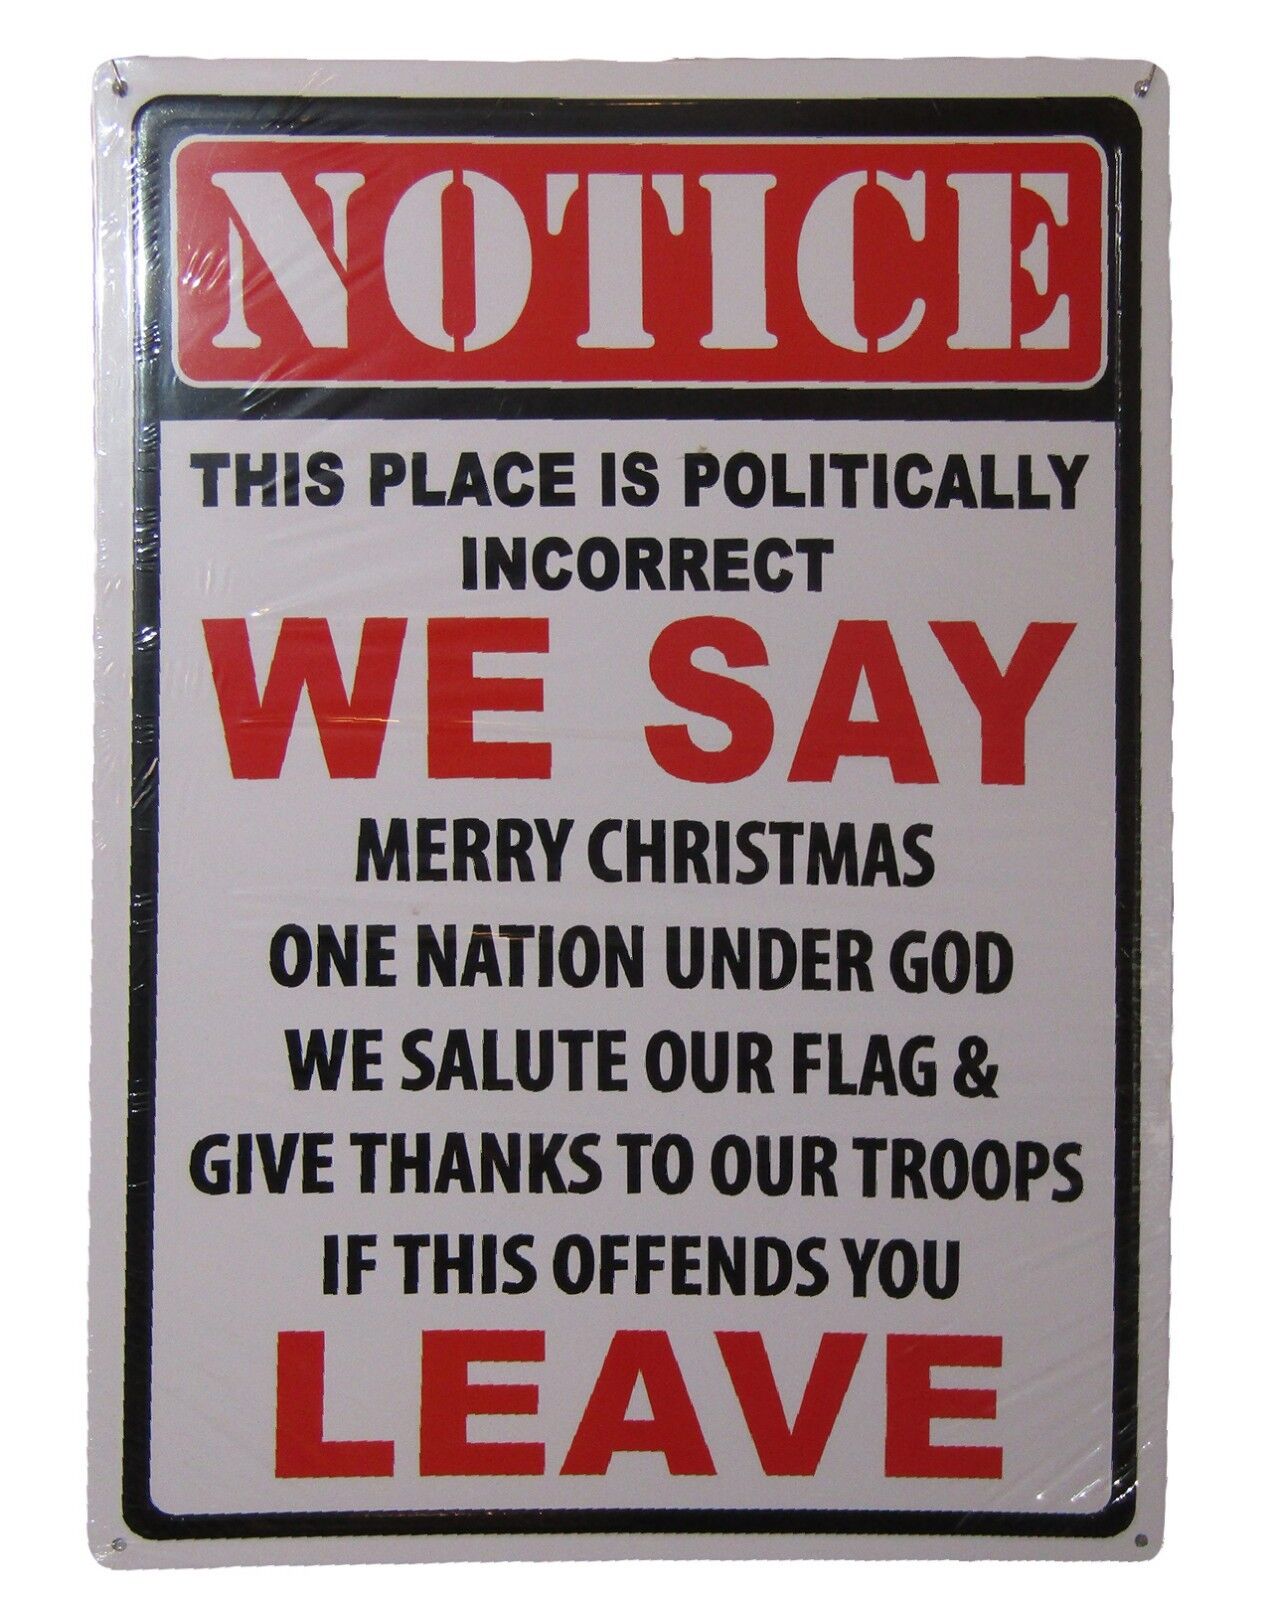 Notice Politically Incorrect We Say If This Offends You Leave 12